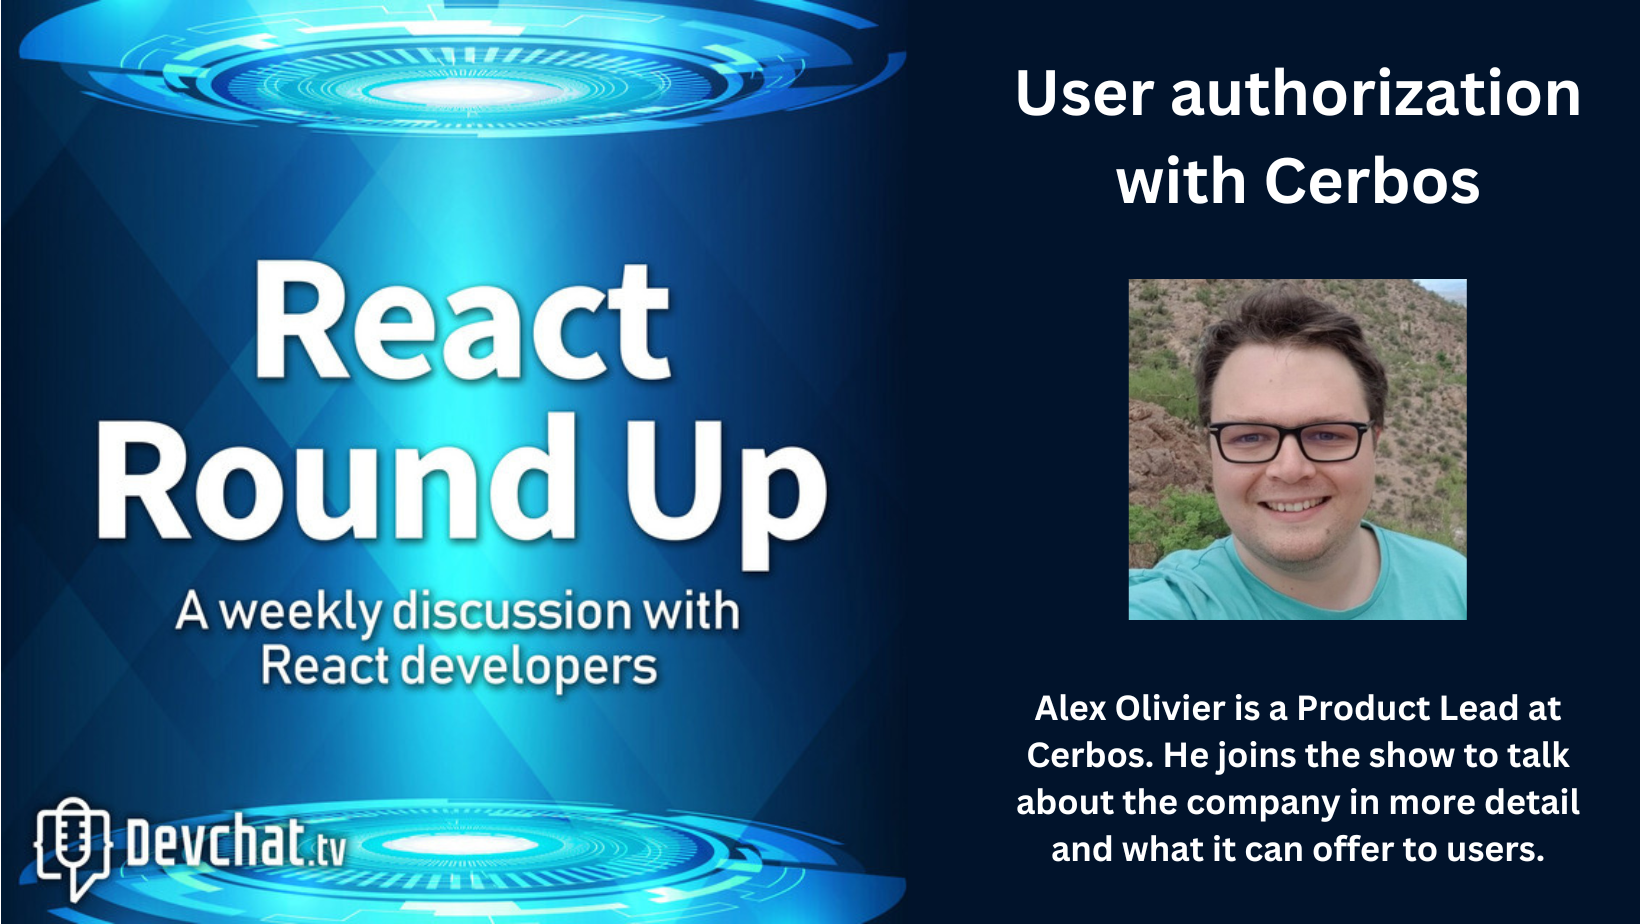 React Round Up podcast: User authorization with Cerbos